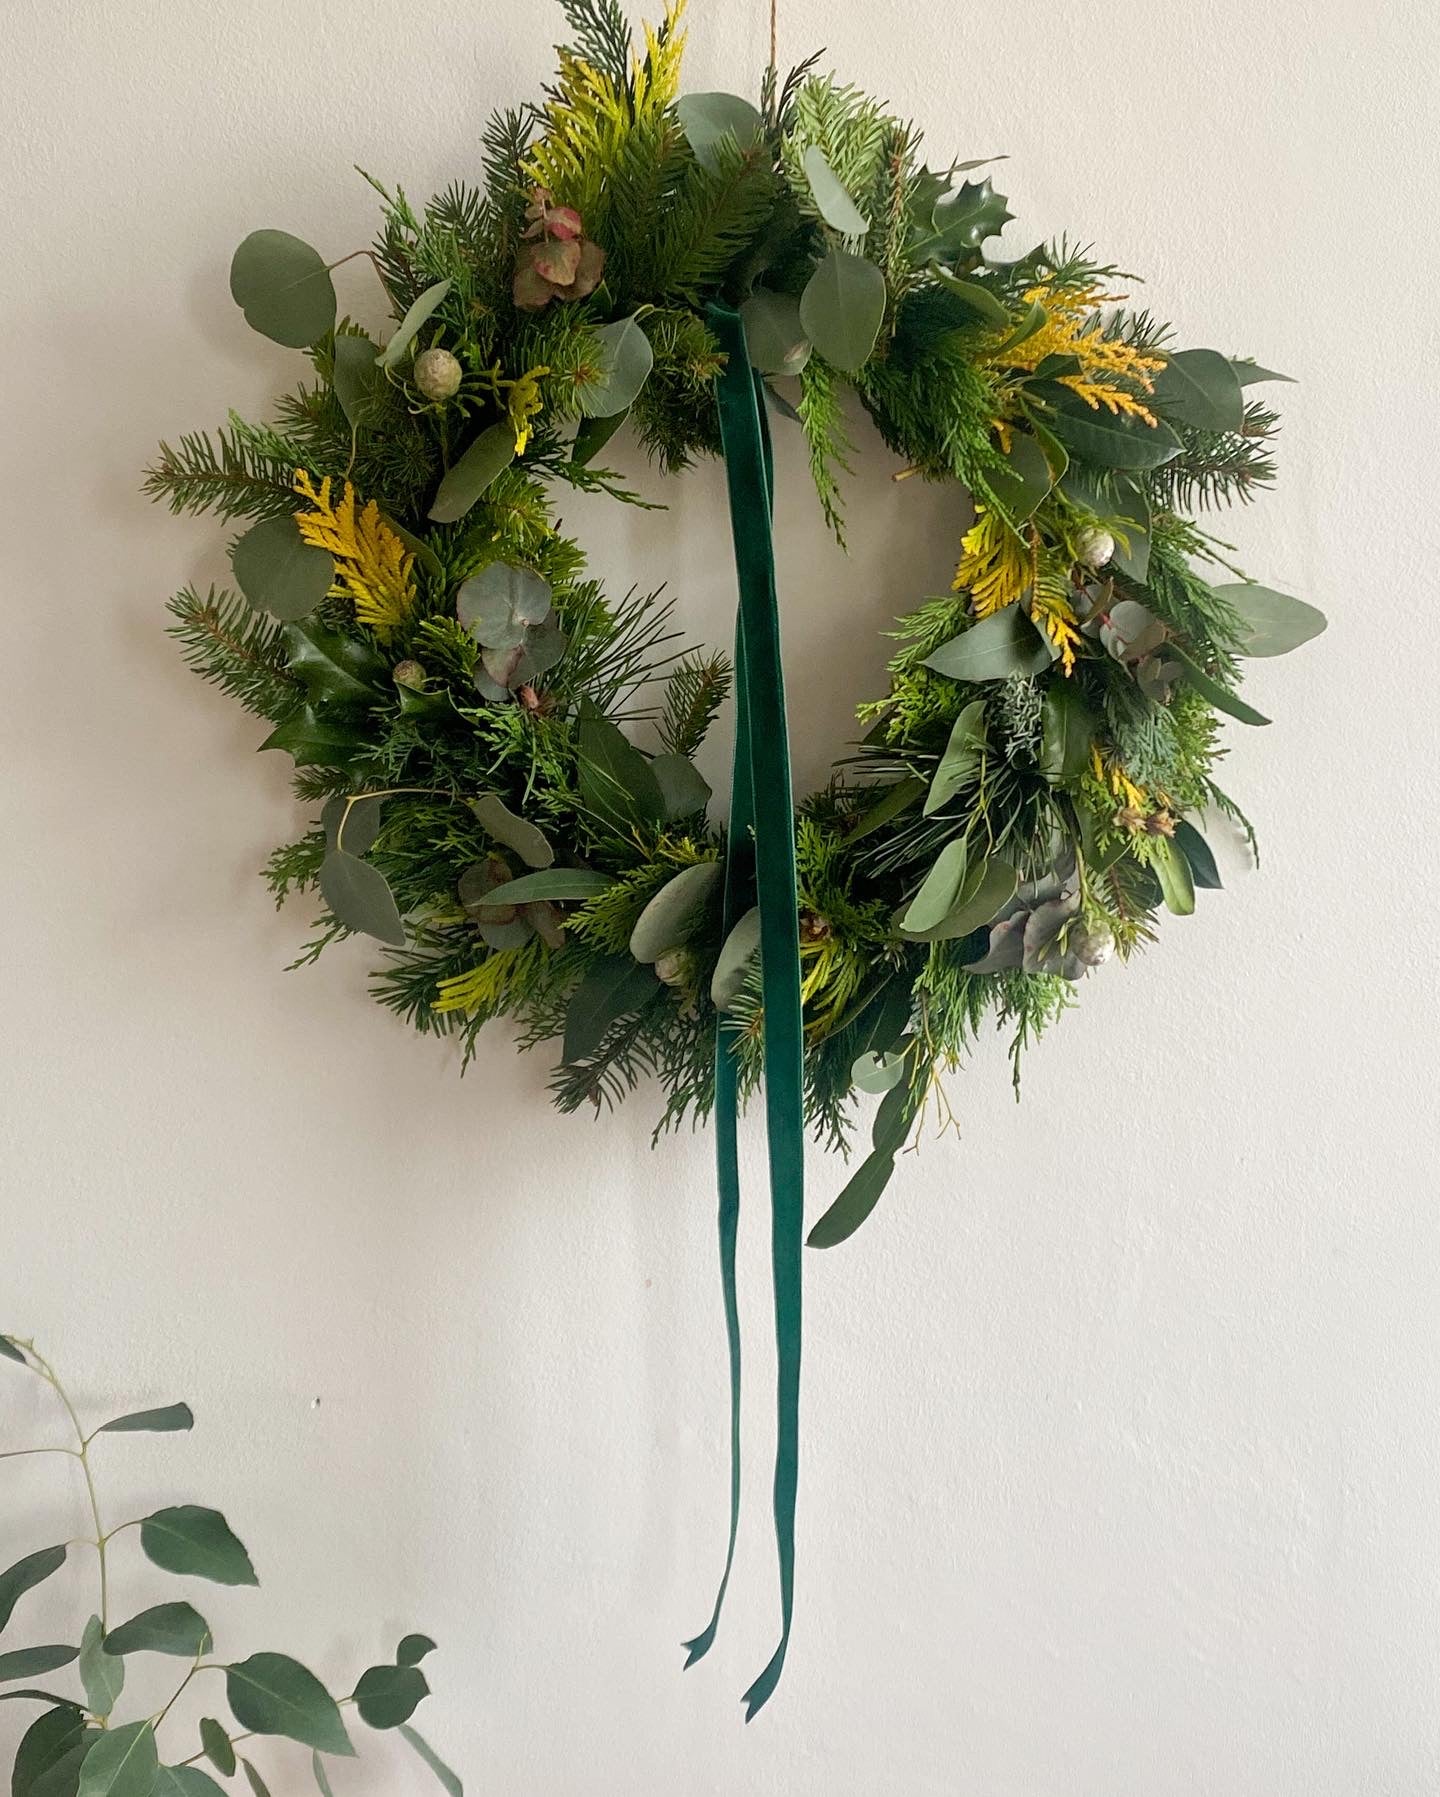 Make Your Own Natural Christmas Wreath (06.12.22)